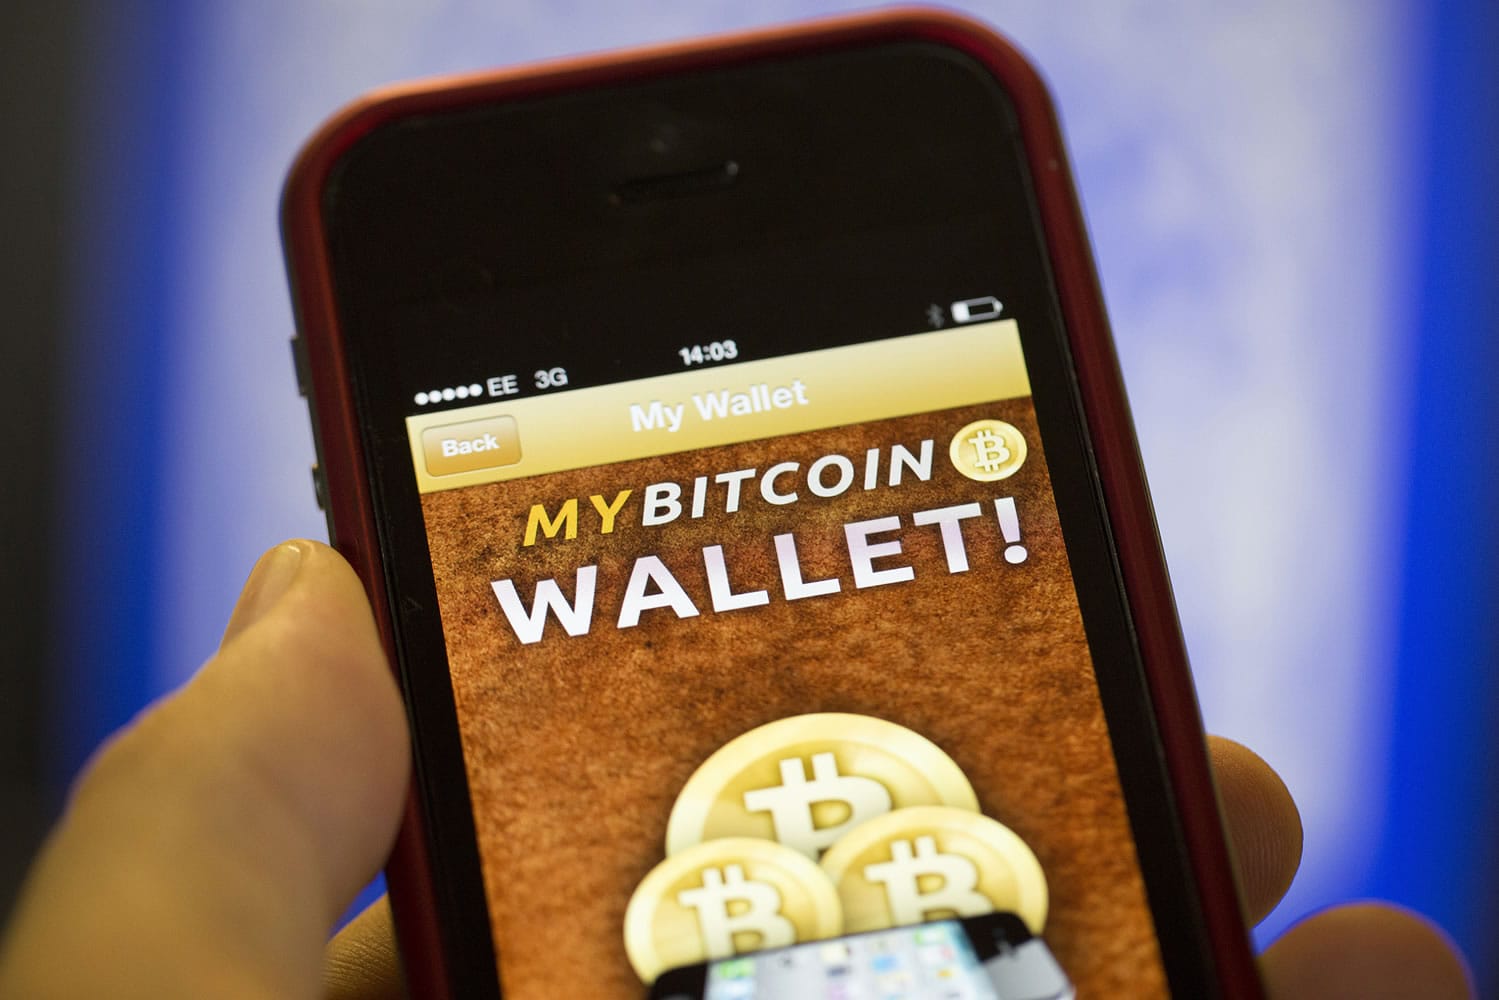 Simon Dawson/Bloomberg News
An iPhone5 displays the Bitcoin Wallet smartphone app. Bitcoin is an online financial network that people use to send payments from one person to another.